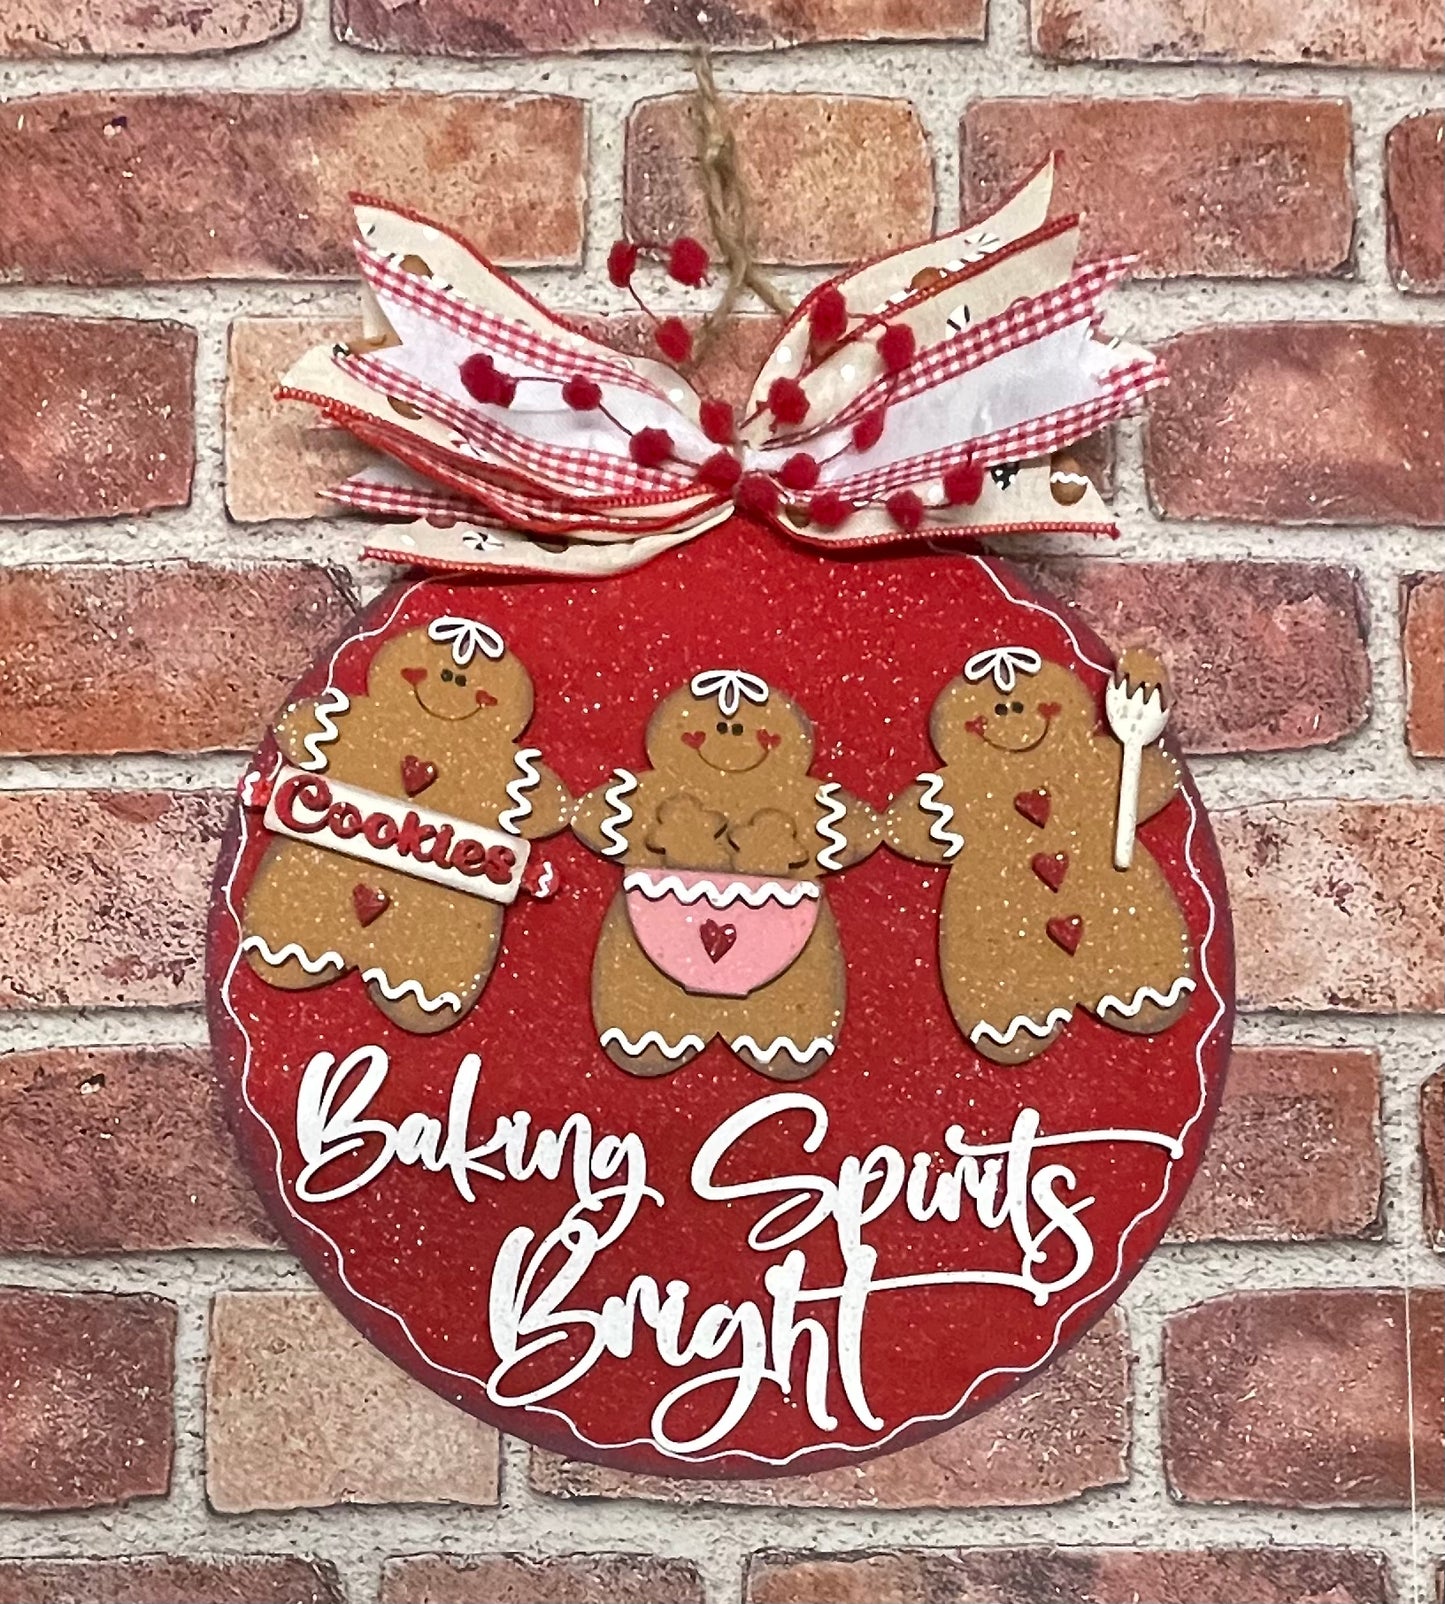 Baking Spirits Bright Gingerbread Man sign kit, unpainted wooden cutouts - ready for you to paint, includes the circle